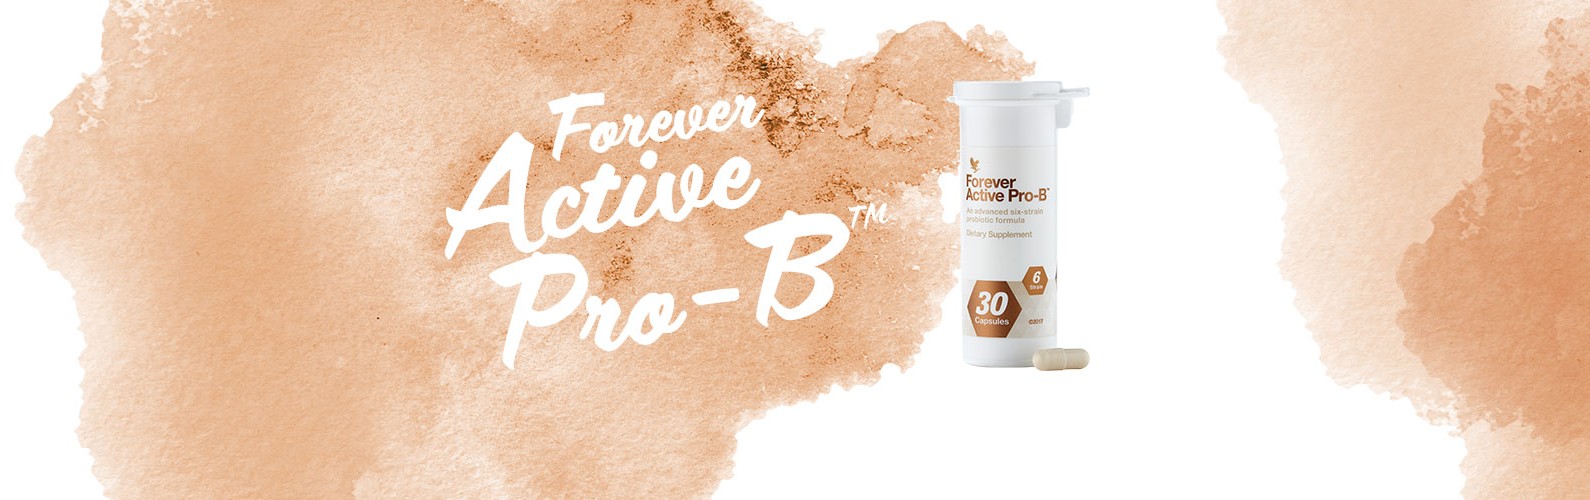 Forever Active Pro-B™